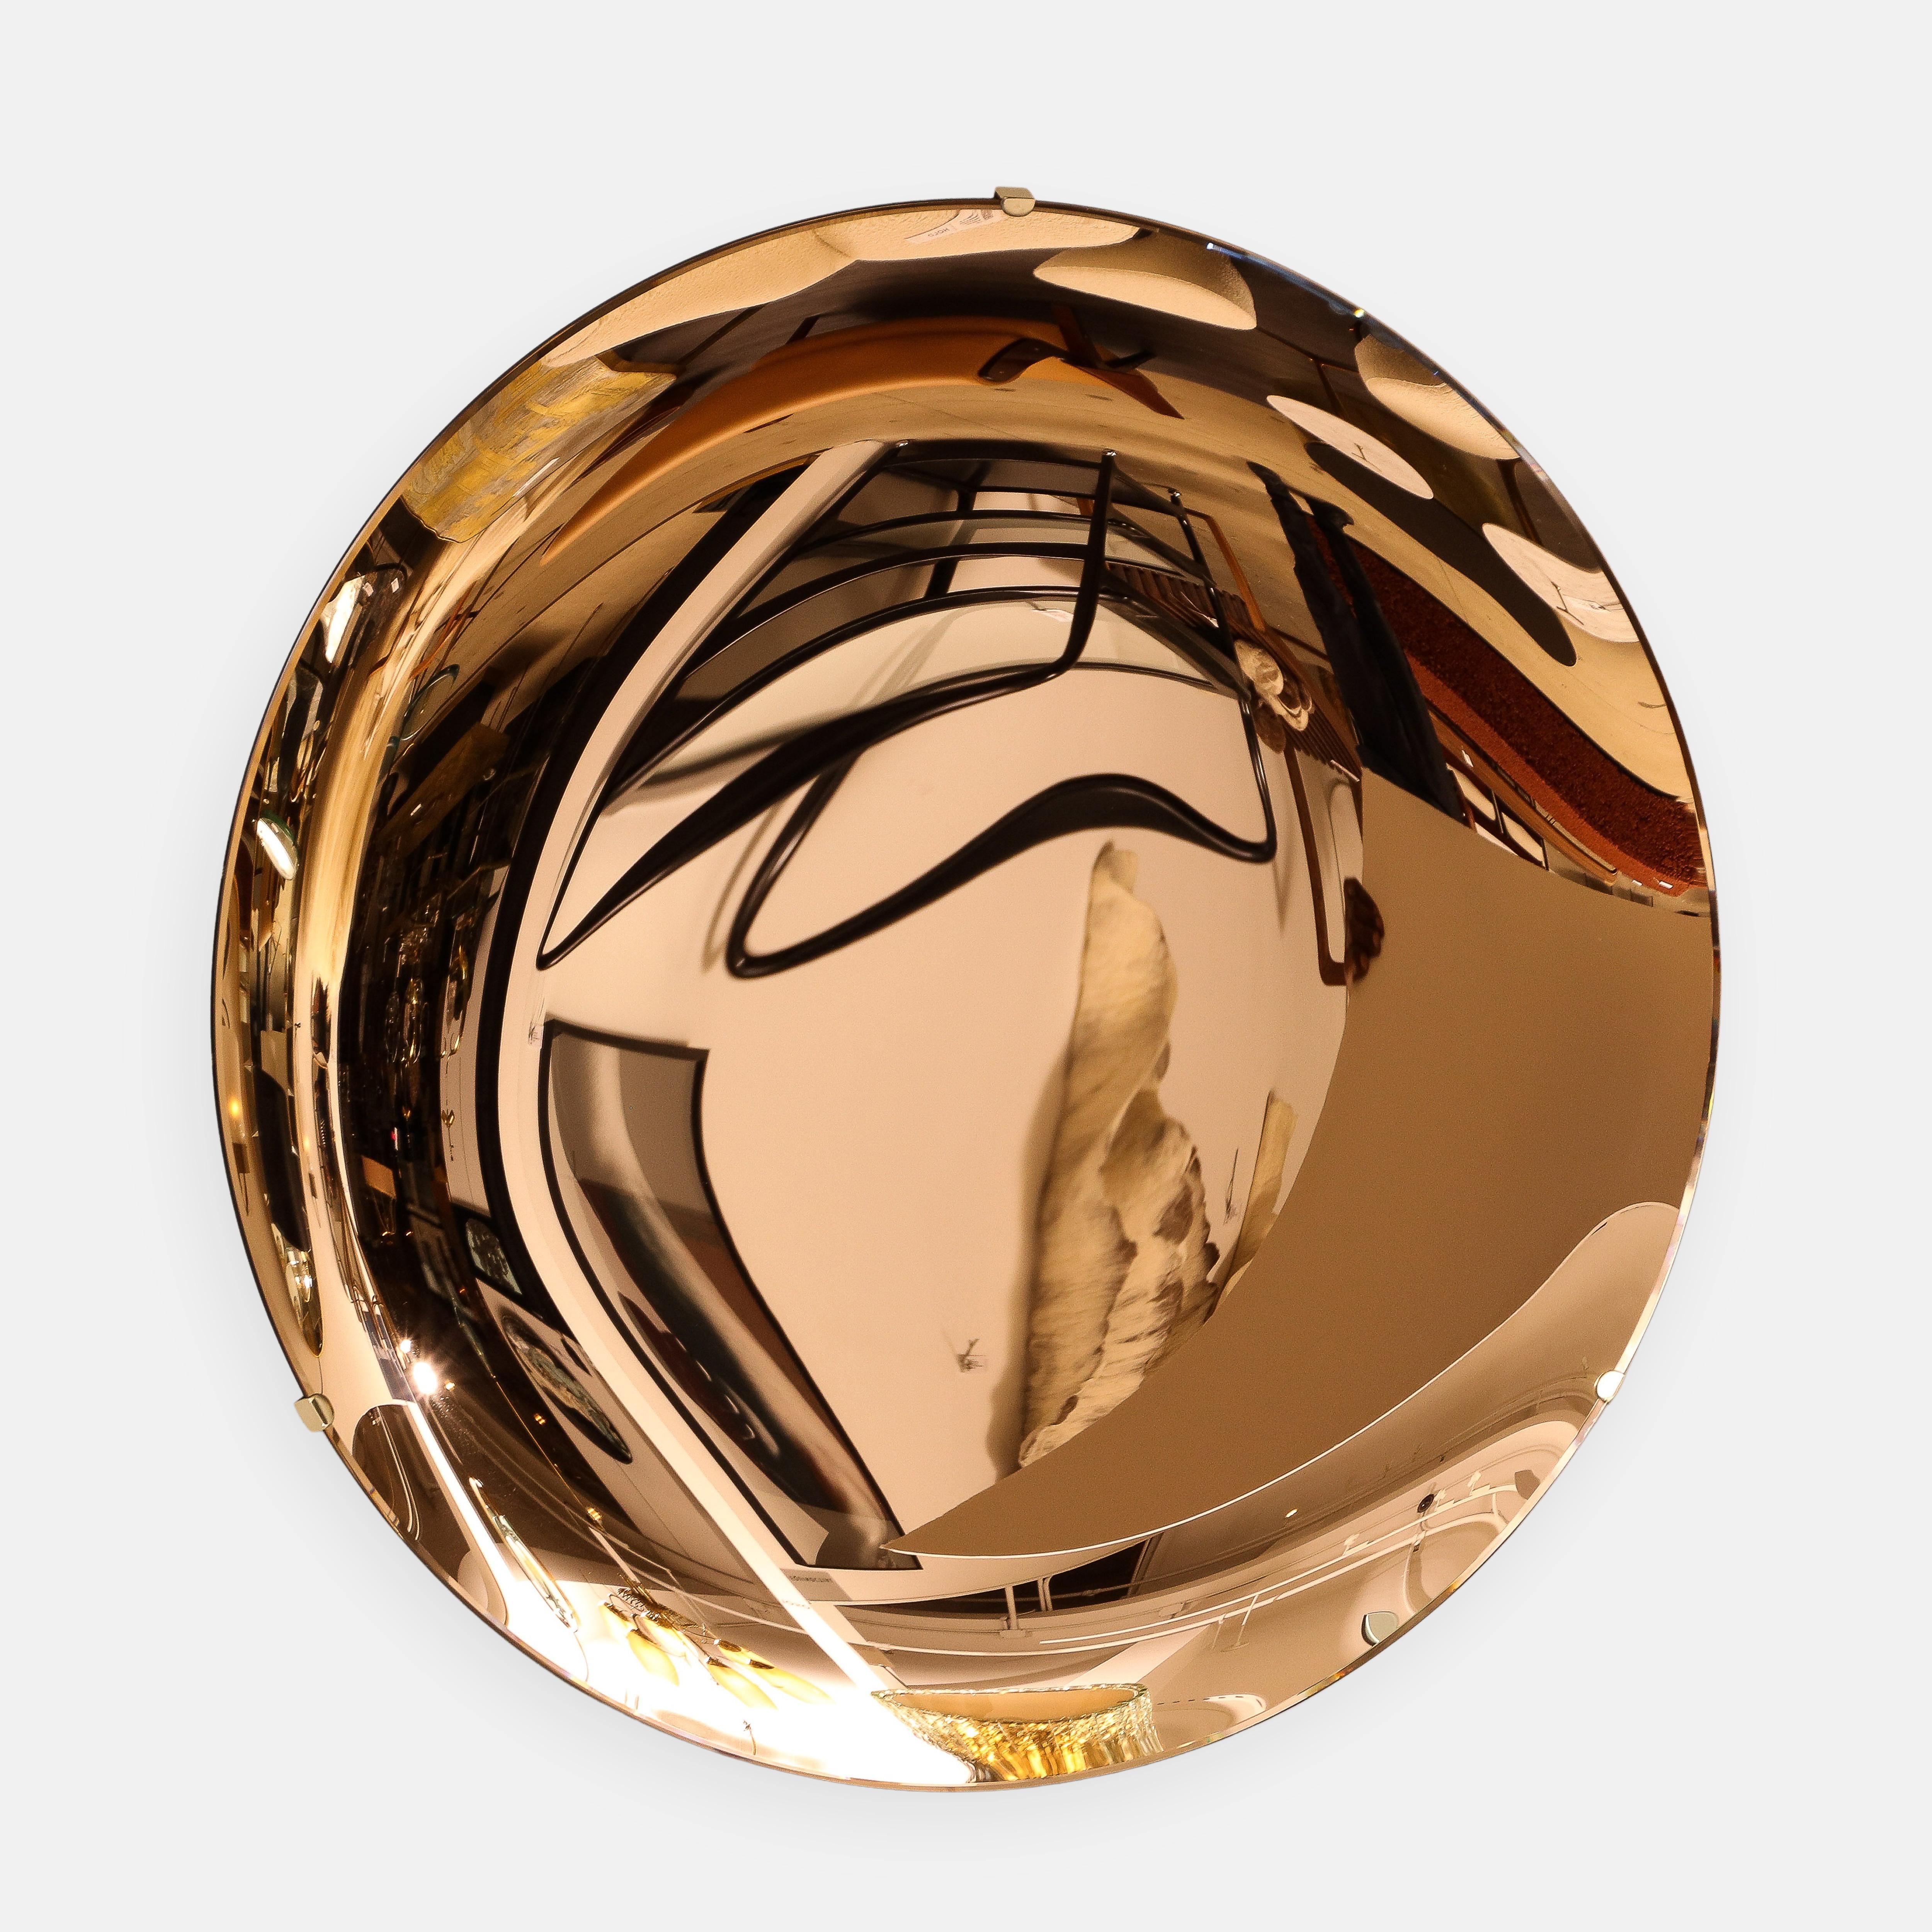 Effetto Vetro contemporary large round concave rose-colored mirrored glass mounted on a polished brass structure on the back with three mounting clips on the front edges, Italy, 2023. This exquisite mirror is handmade and hand silvered -  a